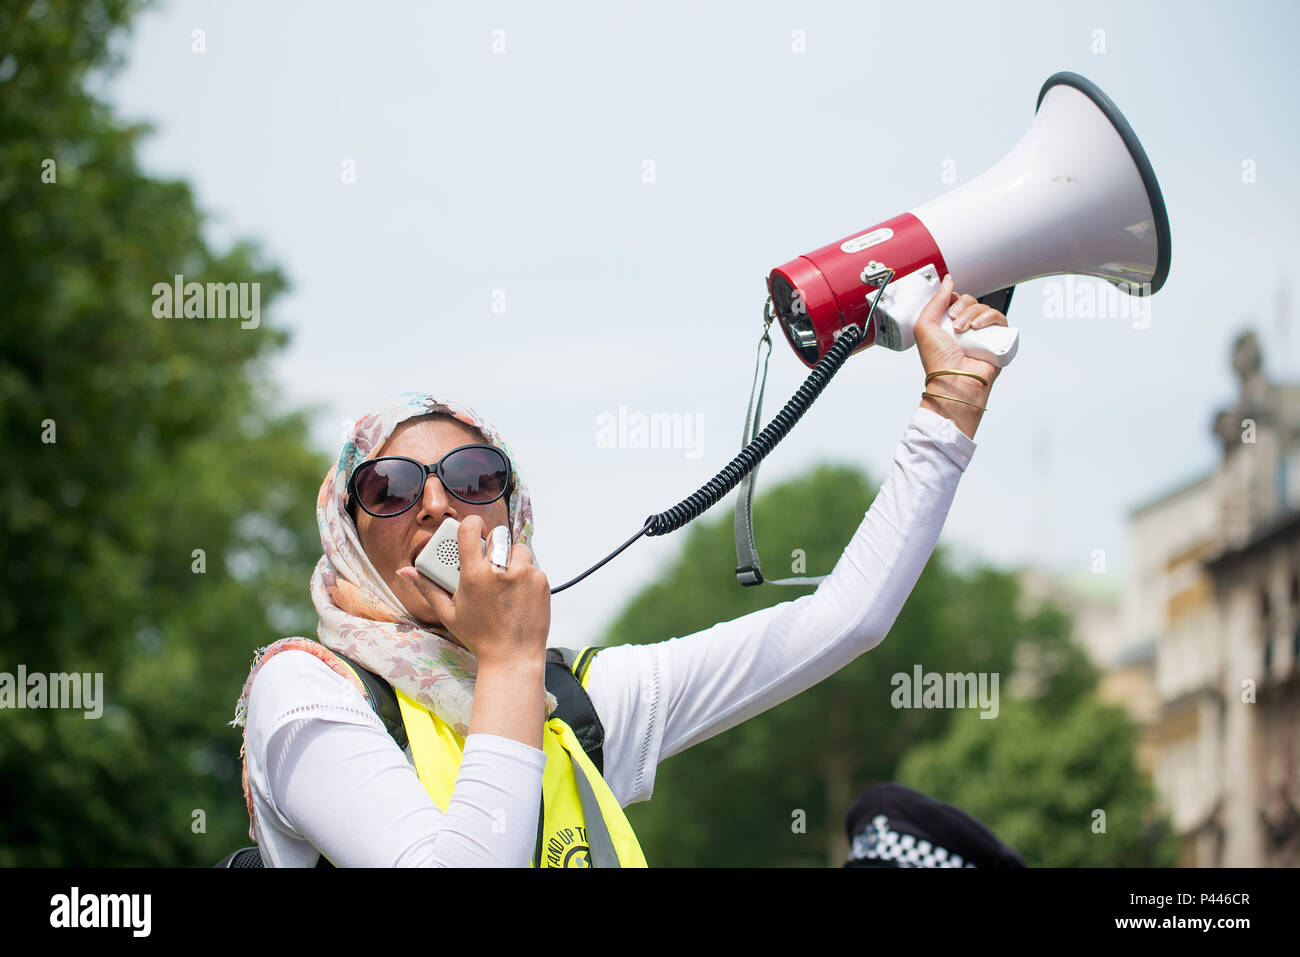 Counter-demo by pressure group Unite Against Fascism, in protest of a rally being held by supporters of Tommy Robinson outside Downing Street, London. Stock Photo